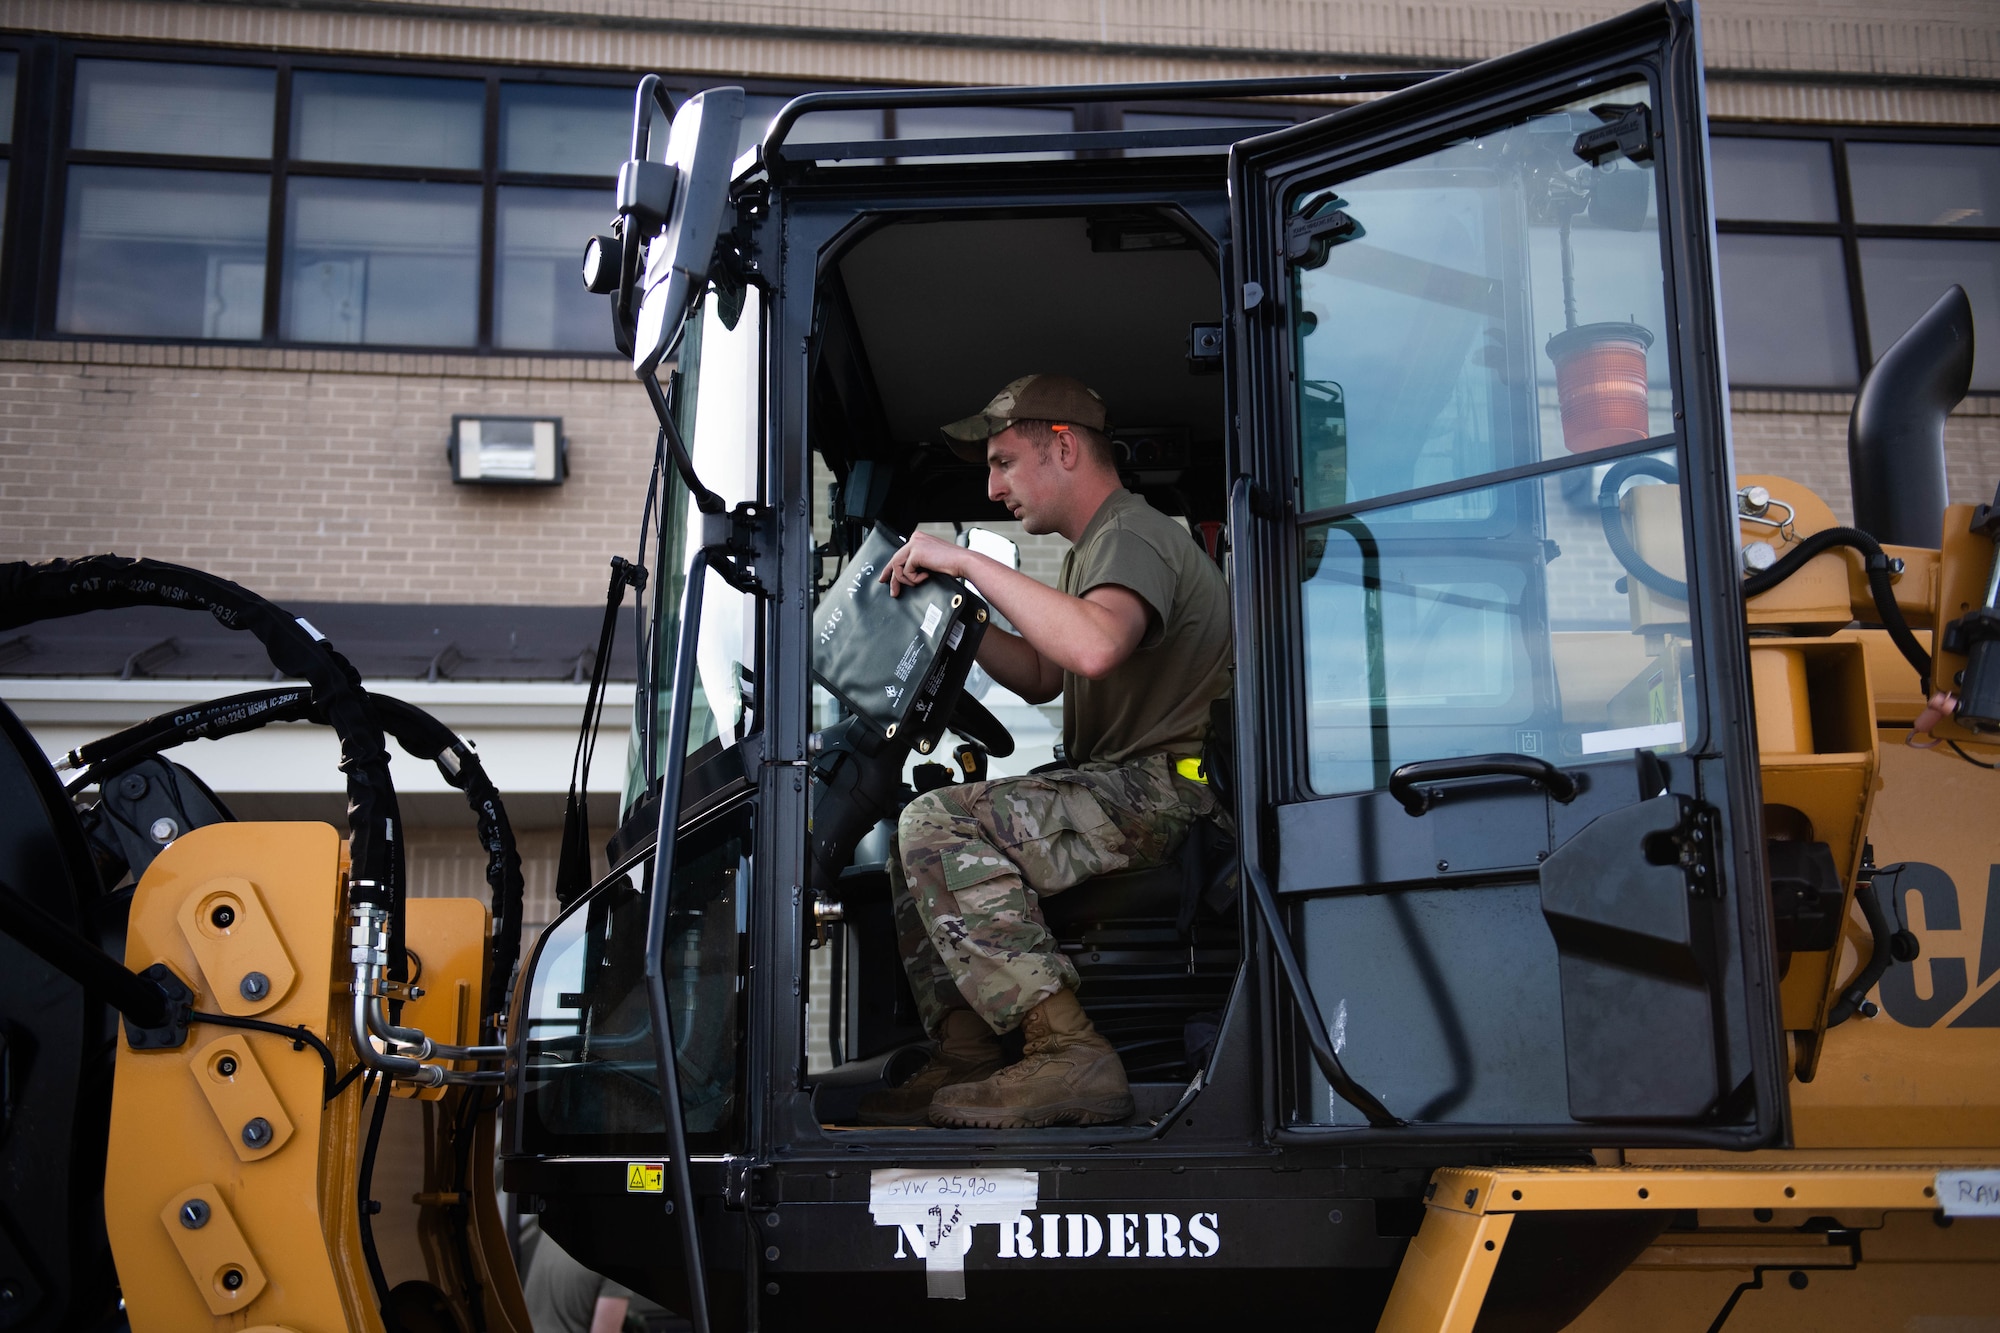 U.S. Air Force Airman 1st Class Brendan Girard, 436th Aerial Port Squadron air transportation specialist, inspects a 10K AT forklift at Dover Air Force Base, Delaware, Nov. 17, 2023. 436th APS and 436th Logistic Readiness Squadron practiced preparing the 10K AT Forklift for transportation in response to short-notice taskings. The 436th Mission Generation Group Tactics Team organized the event to strengthen points of interaction between the different squadrons within the group. (U.S. Air Force photo by Tech. Sgt. J.D. Strong II)